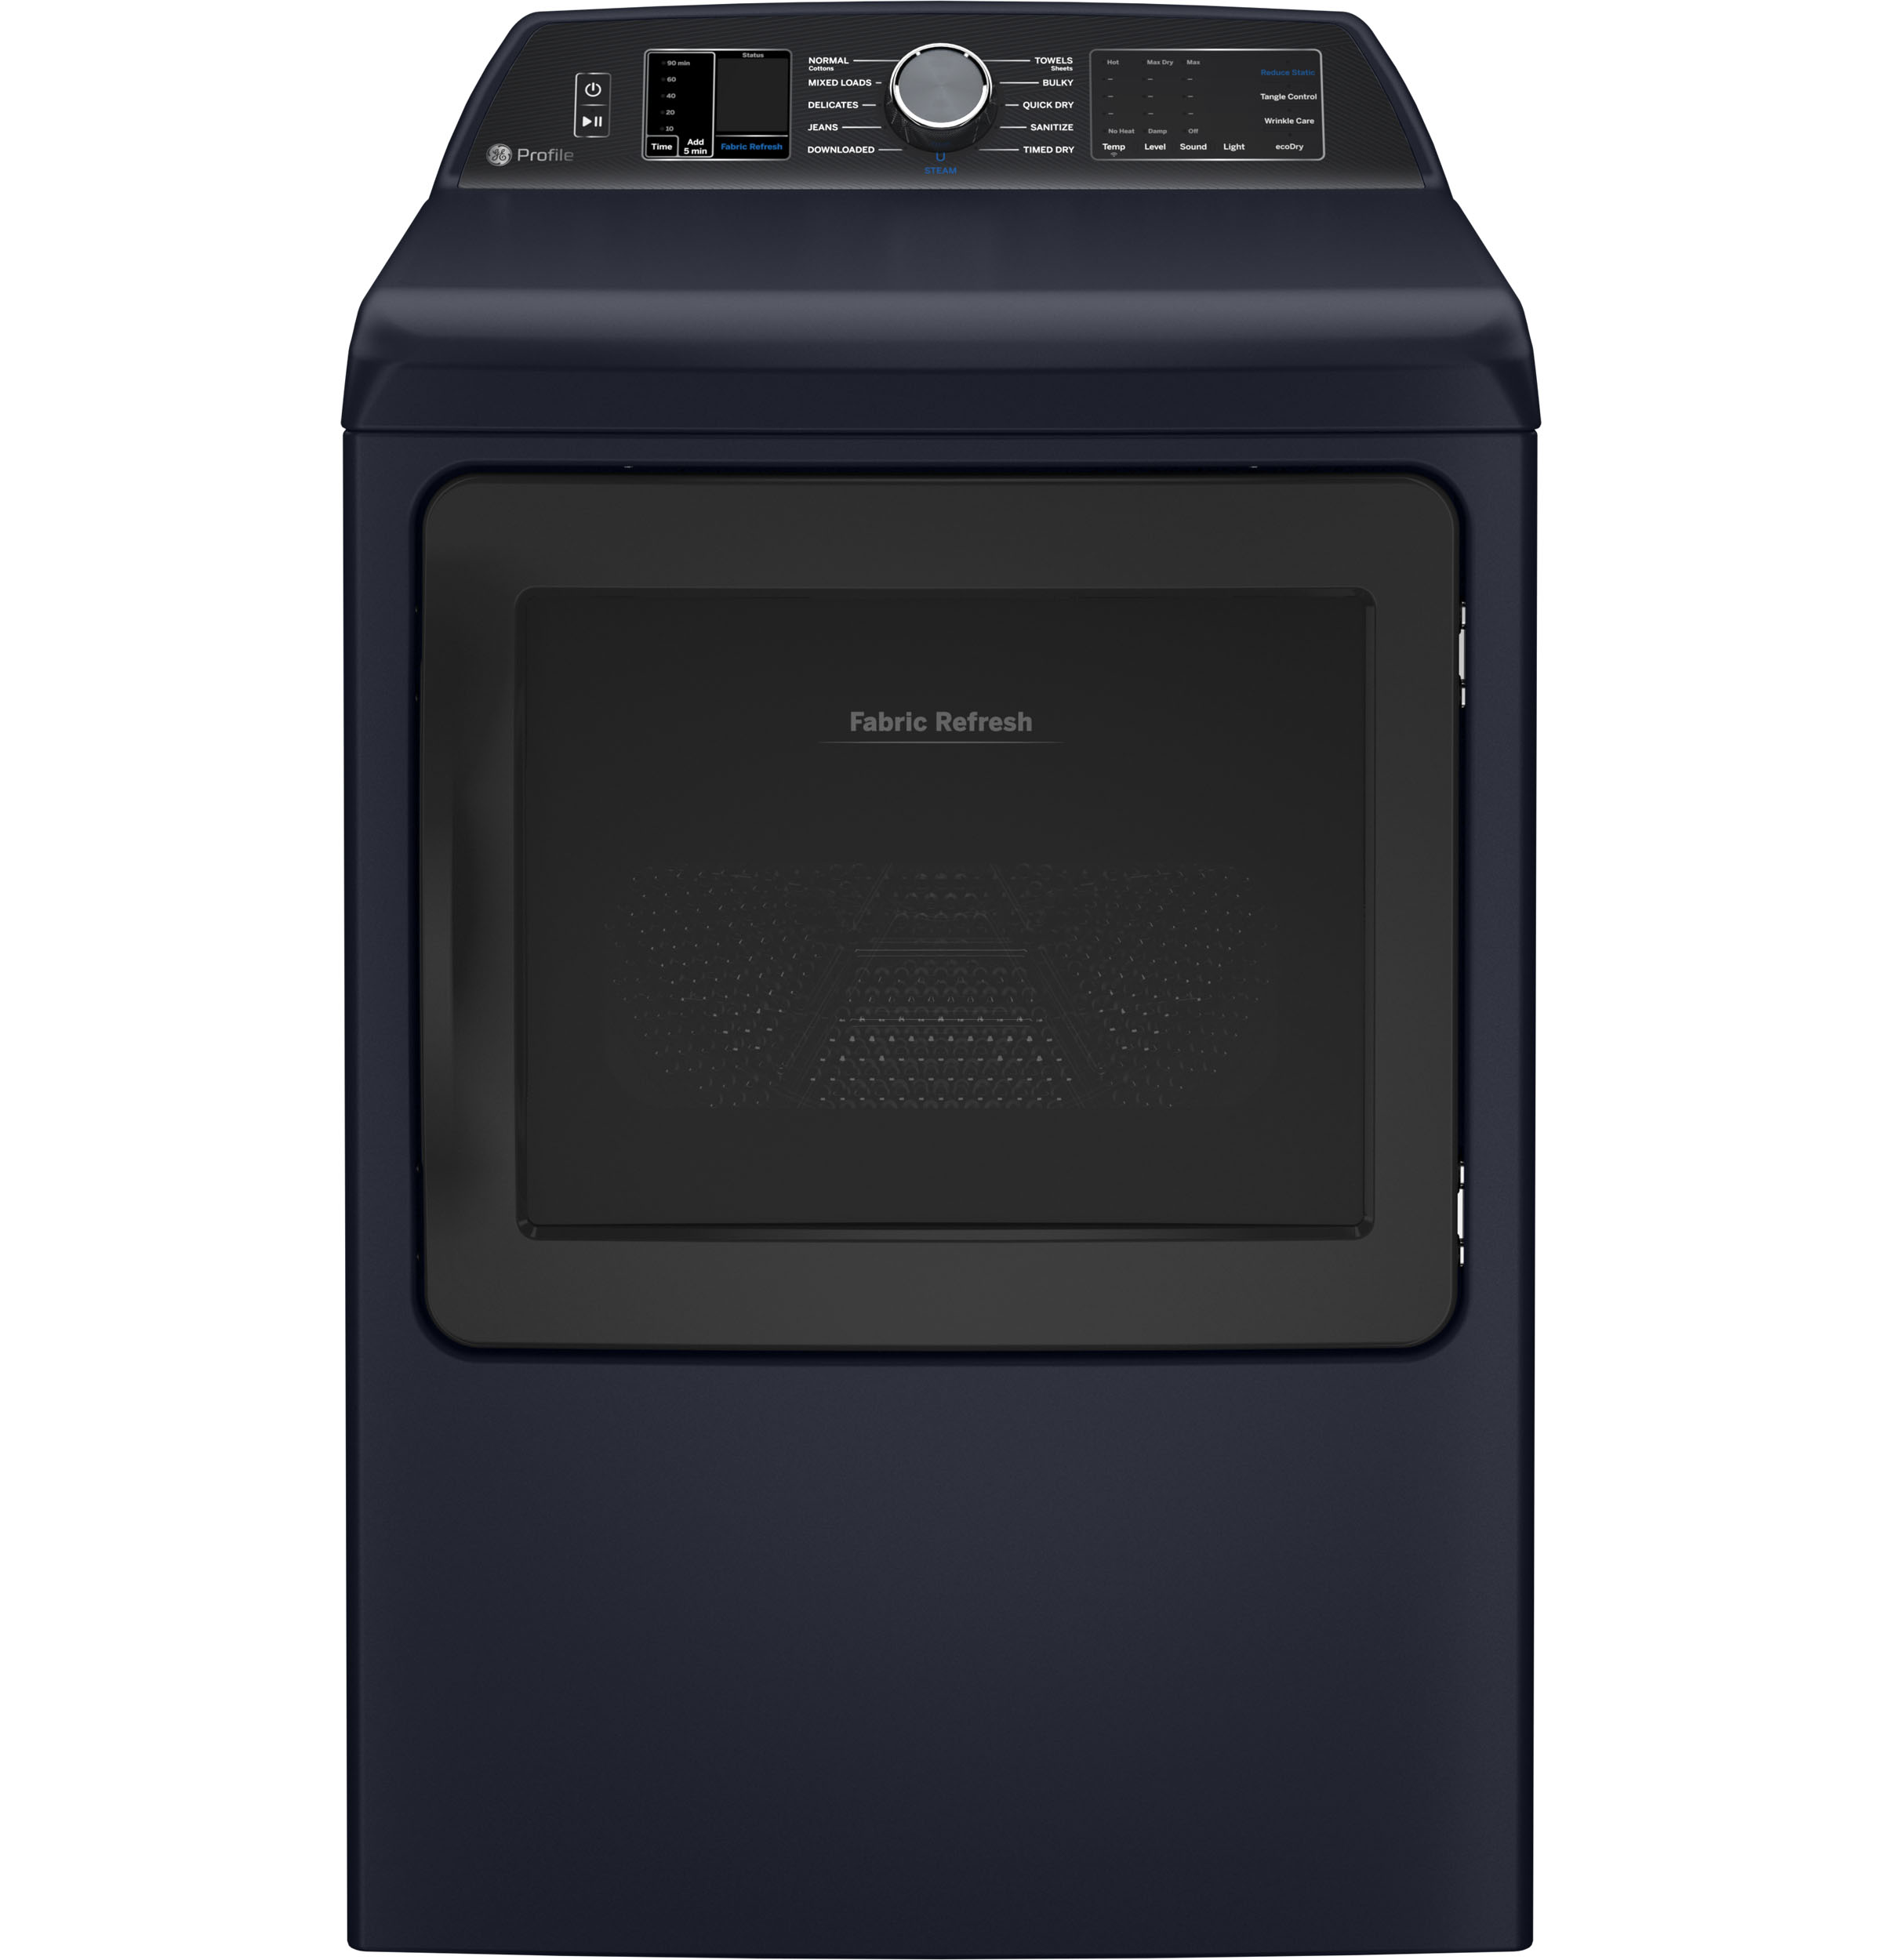 GE Profile™ ENERGY STAR® 7.3 cu. ft. Capacity Smart Electric Dryer with Fabric Refresh